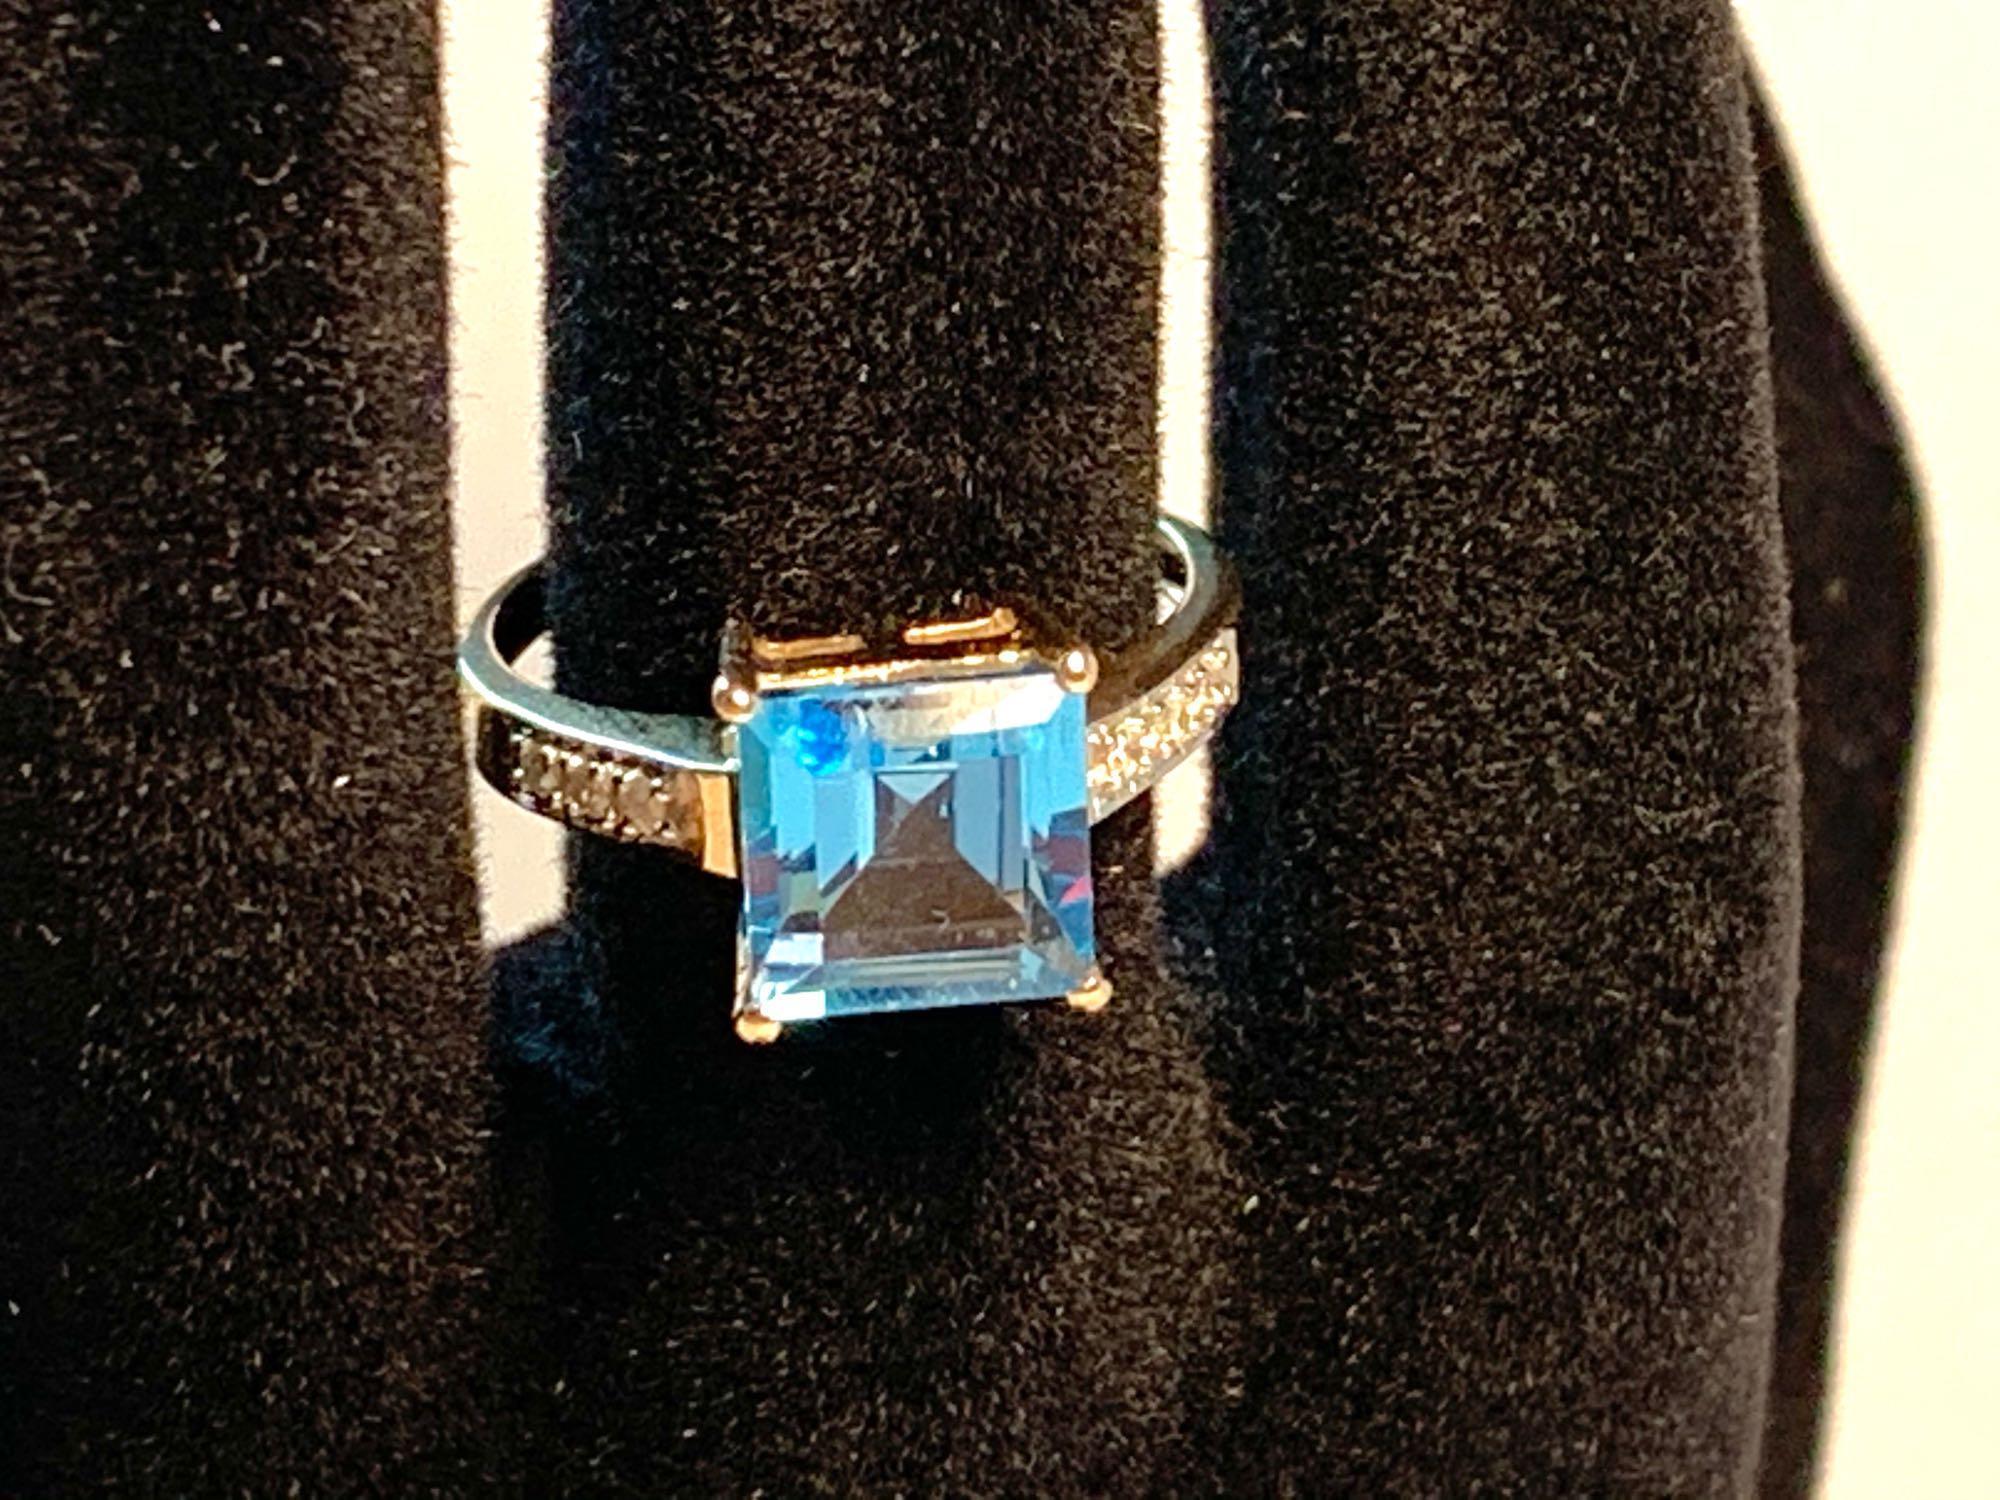 GORGEOUS WOMEN 10K SOLID YELLOW GOLD 3 CTW SWISS BLUE TOPAZ AND DIAMONDS SIZE 7 DESIGNER RING